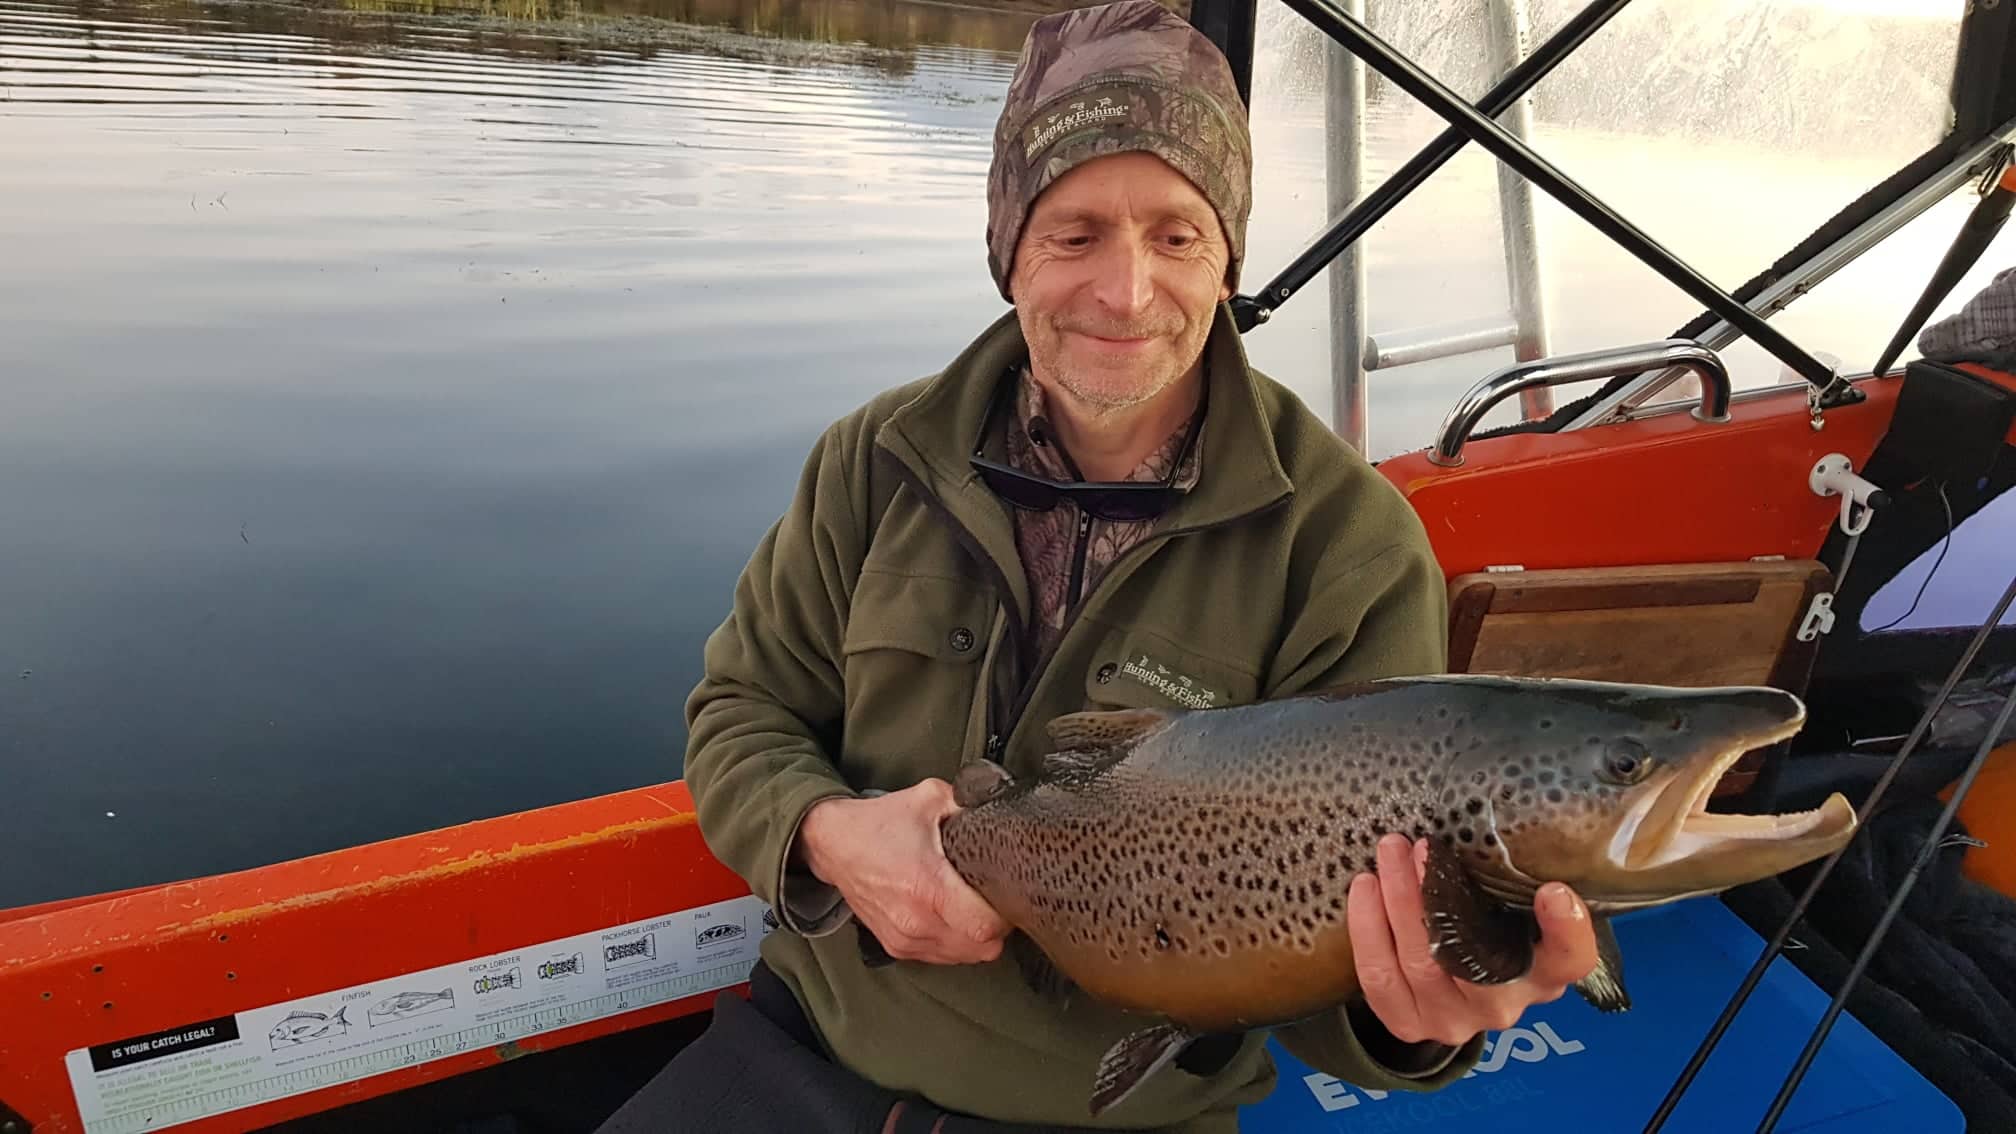 Experience Exclusive Guided Fly Fishing Tours with John at Centennial House Taupo